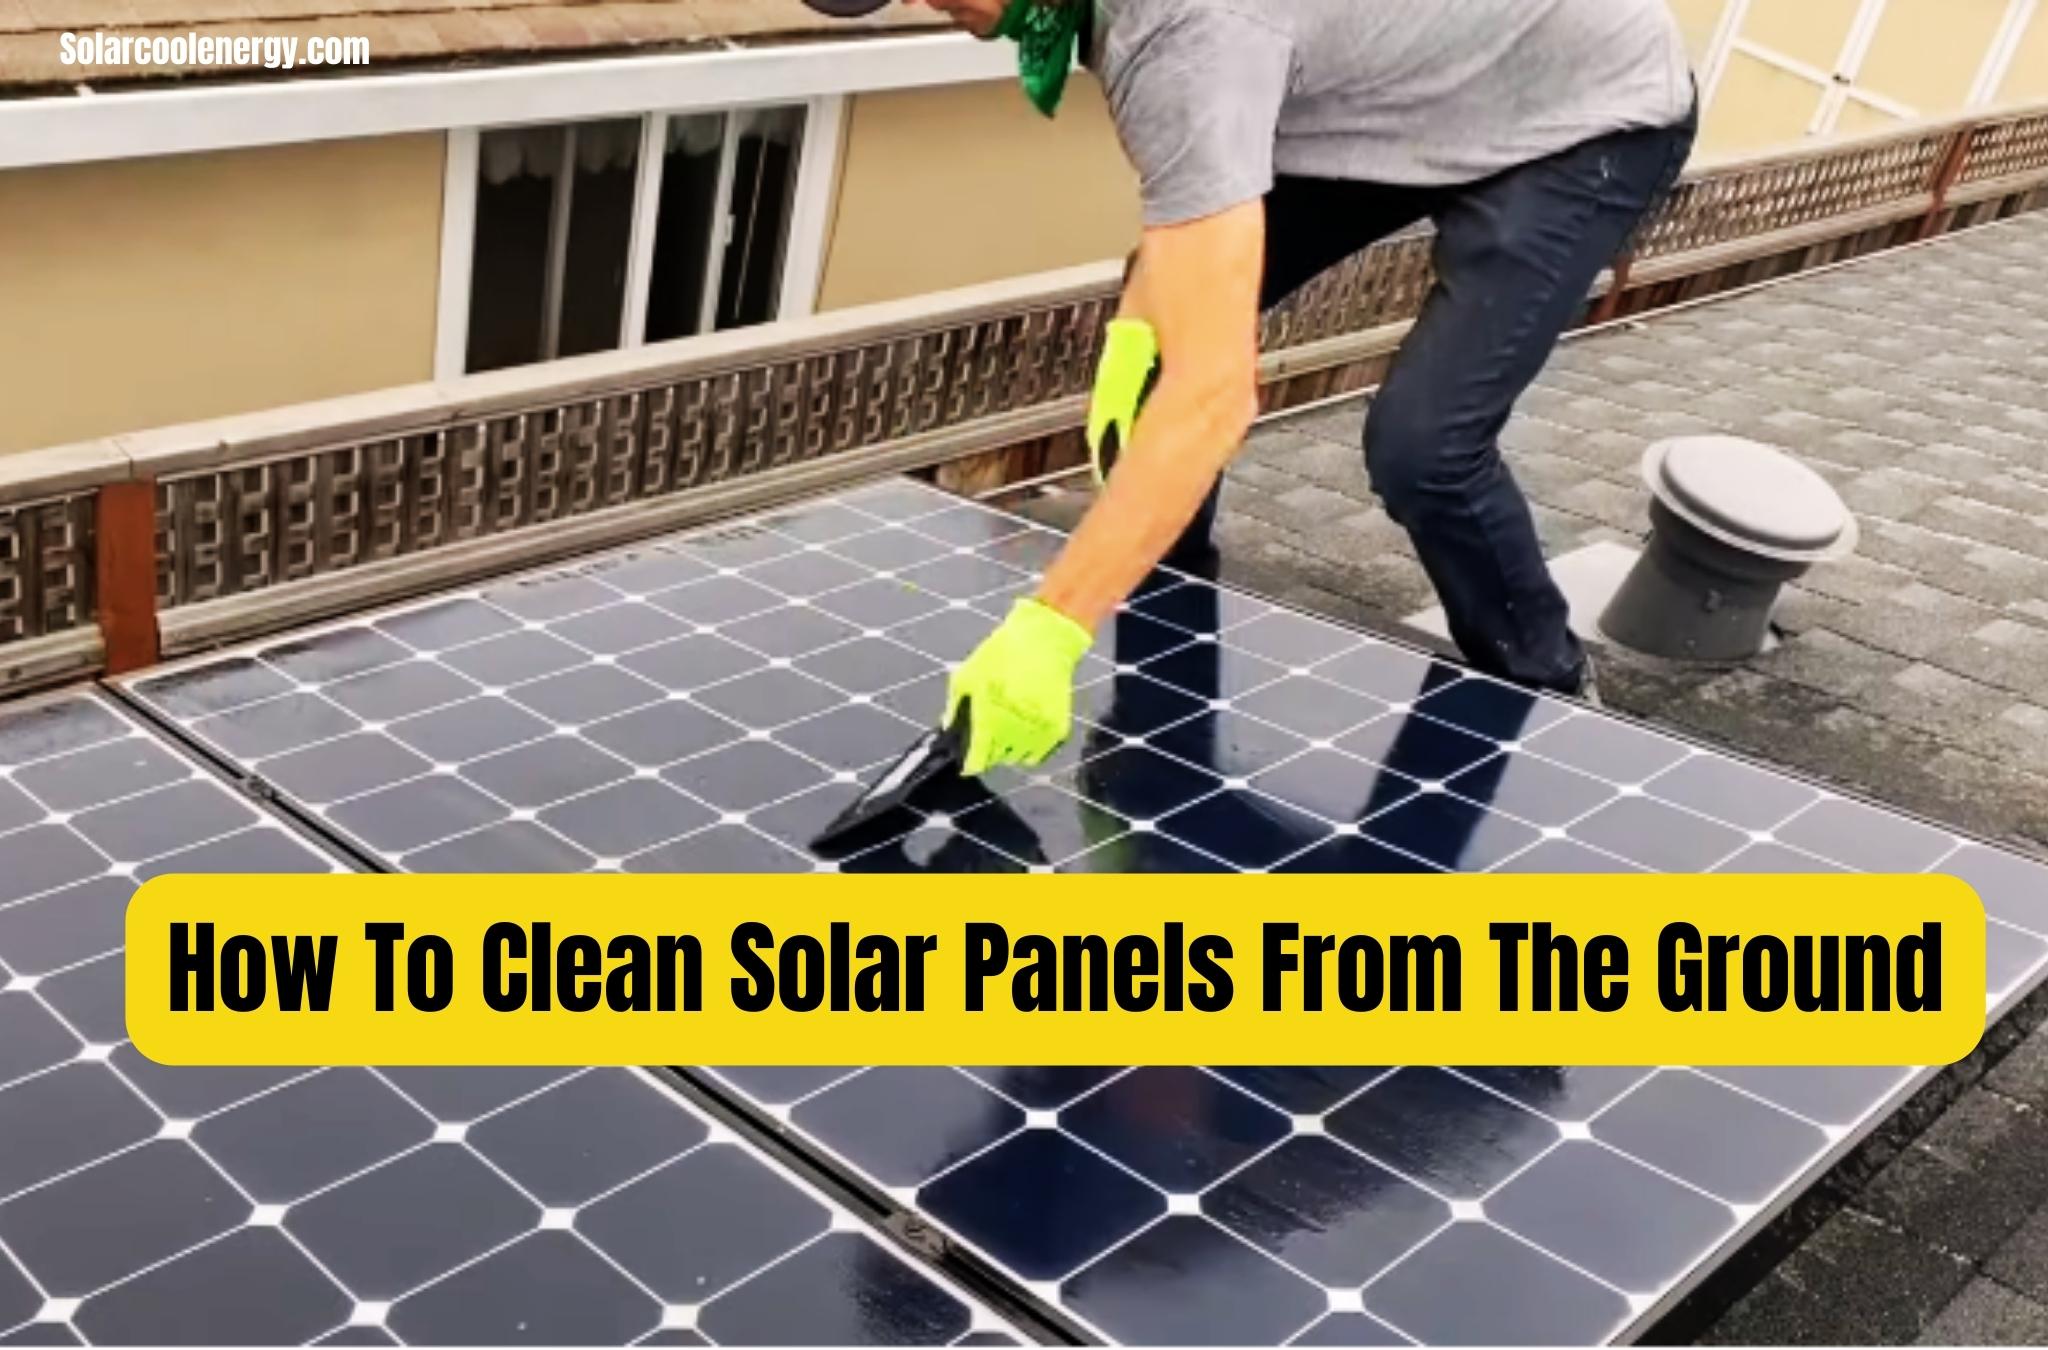 How To Clean Solar Panels From The Ground